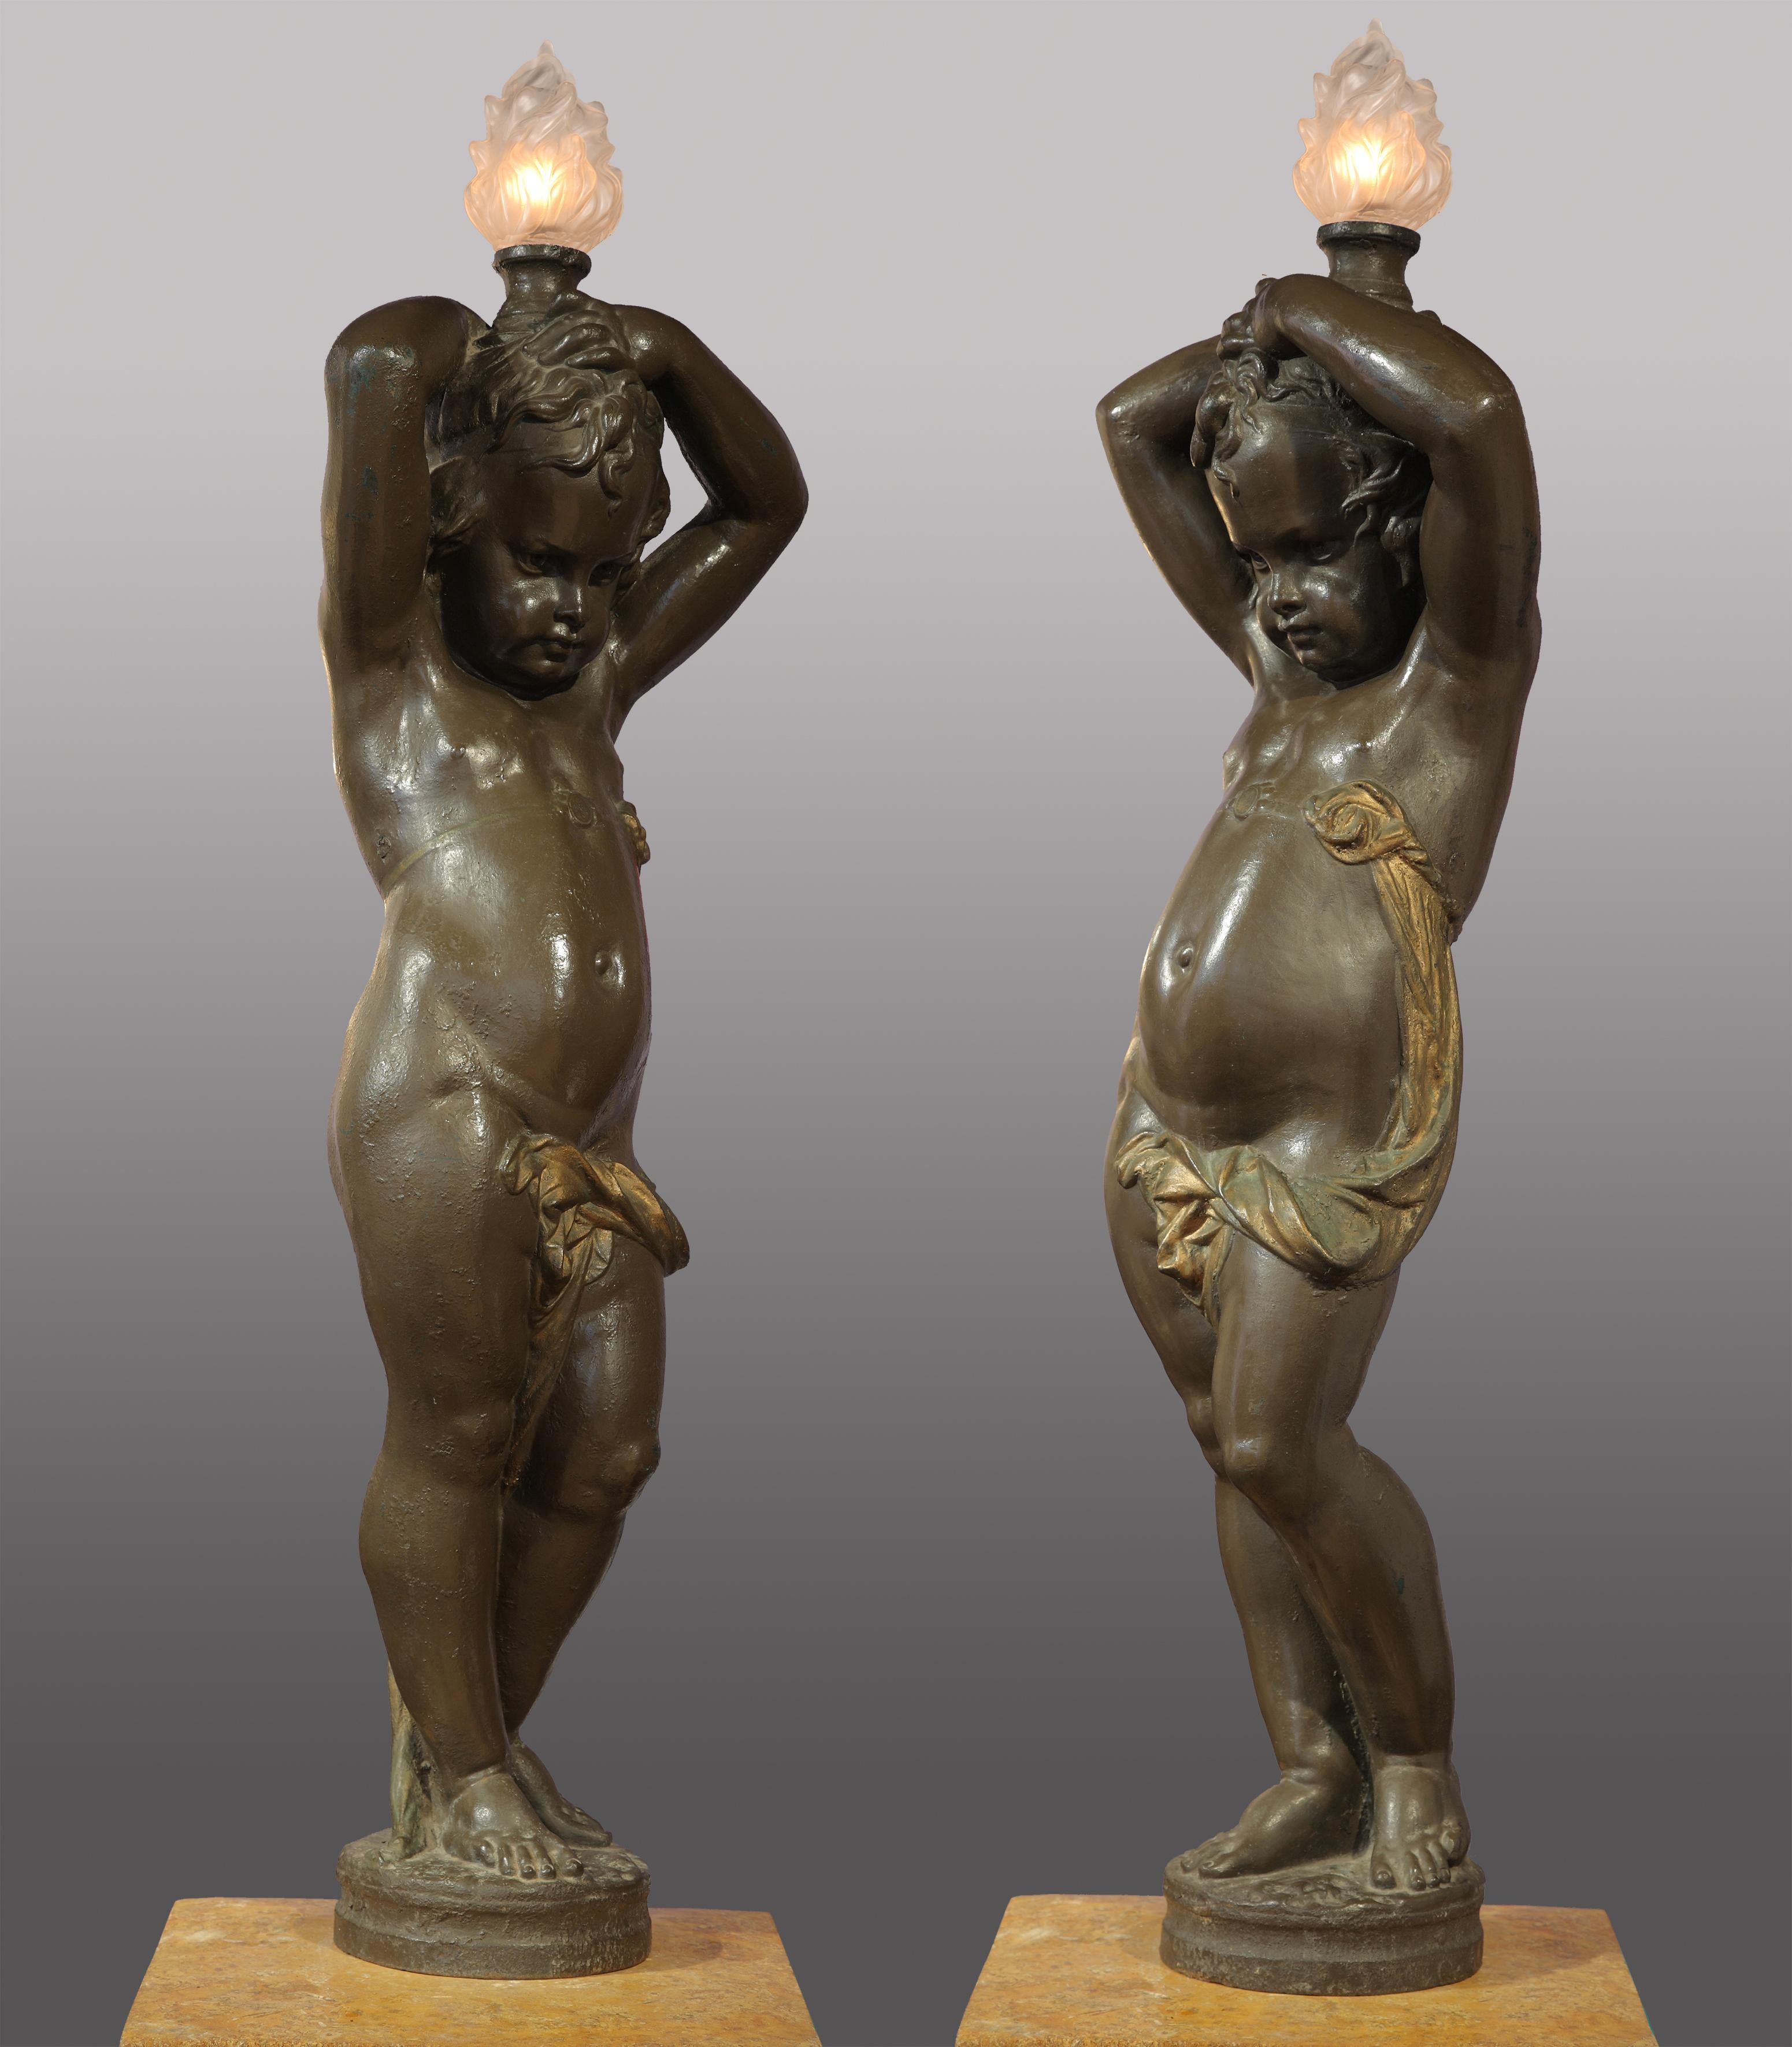 French Pair of Putti Torcheres by A. Durenne & A-E Carrier-Belleuse, France, Circa 1880